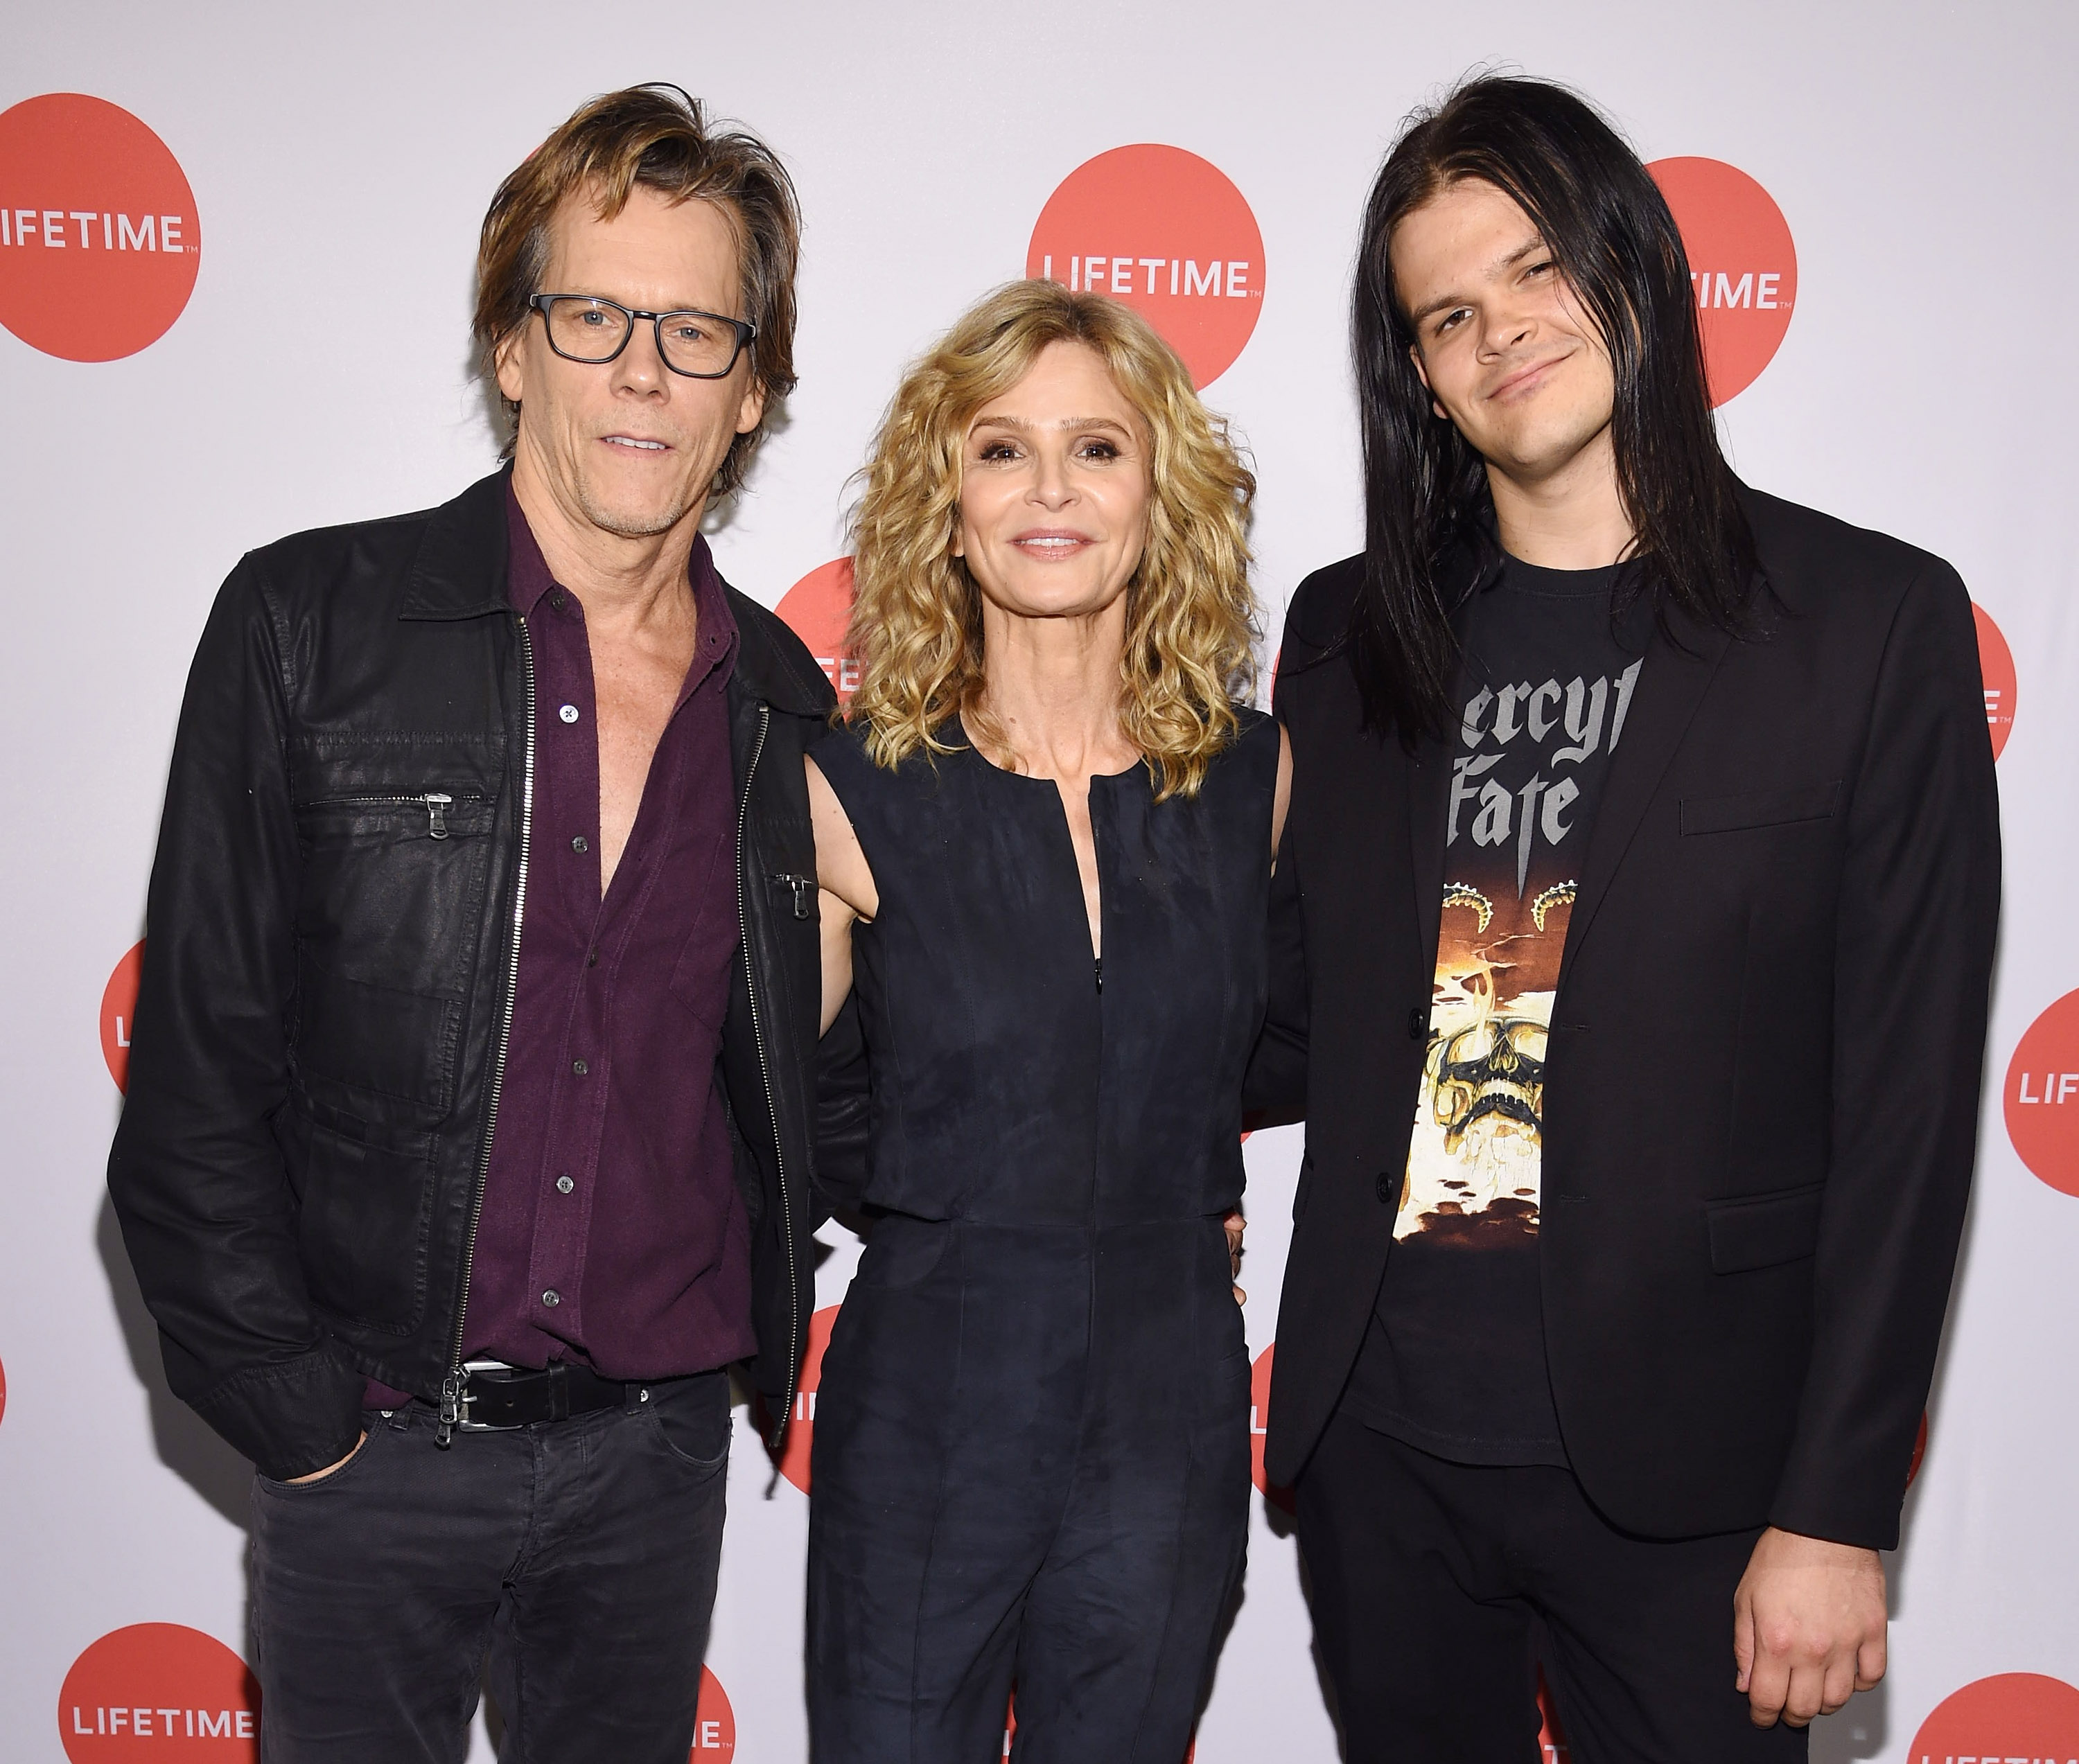 Kyra Sedgwick, Kevin Bacon and Travis Bacon attend the "Story Of A Girl" screening in New York City on July 17, 2017. | Source: Getty Images